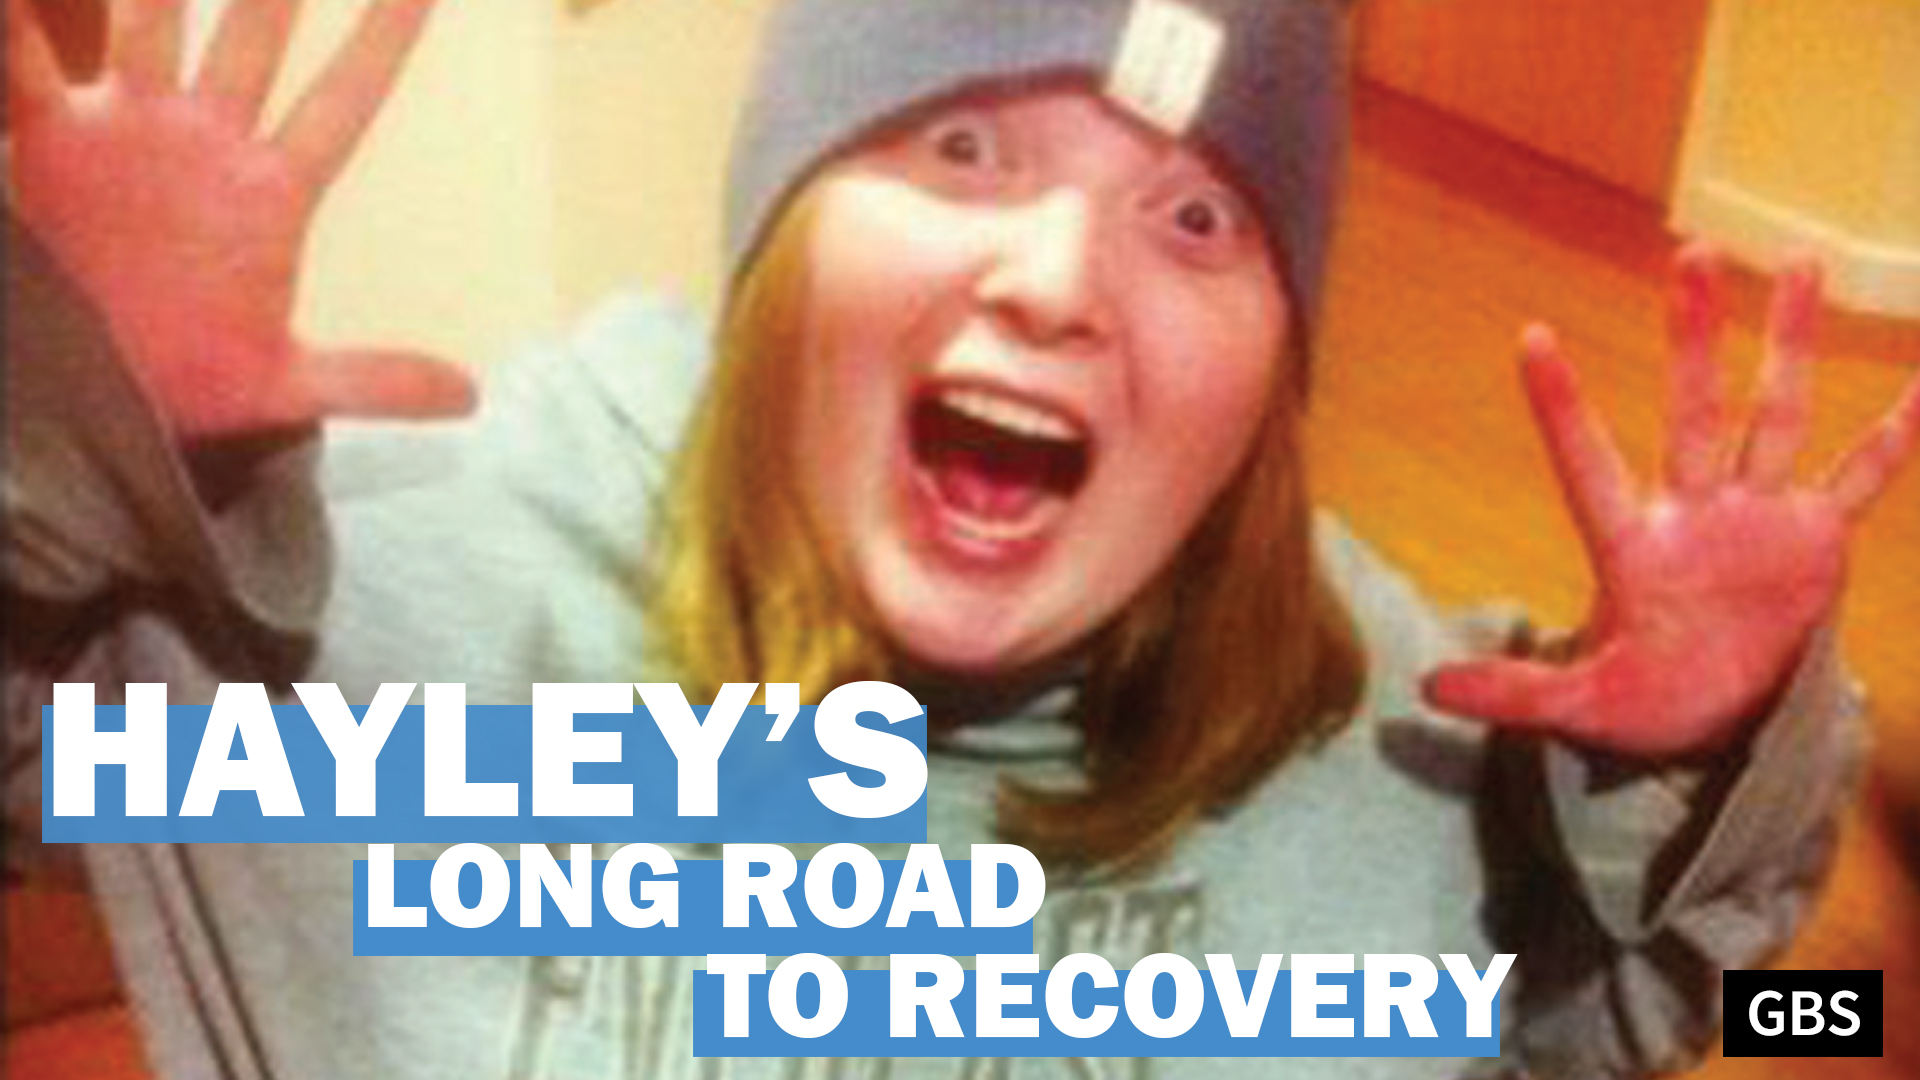 Hayley’s long road to recovery